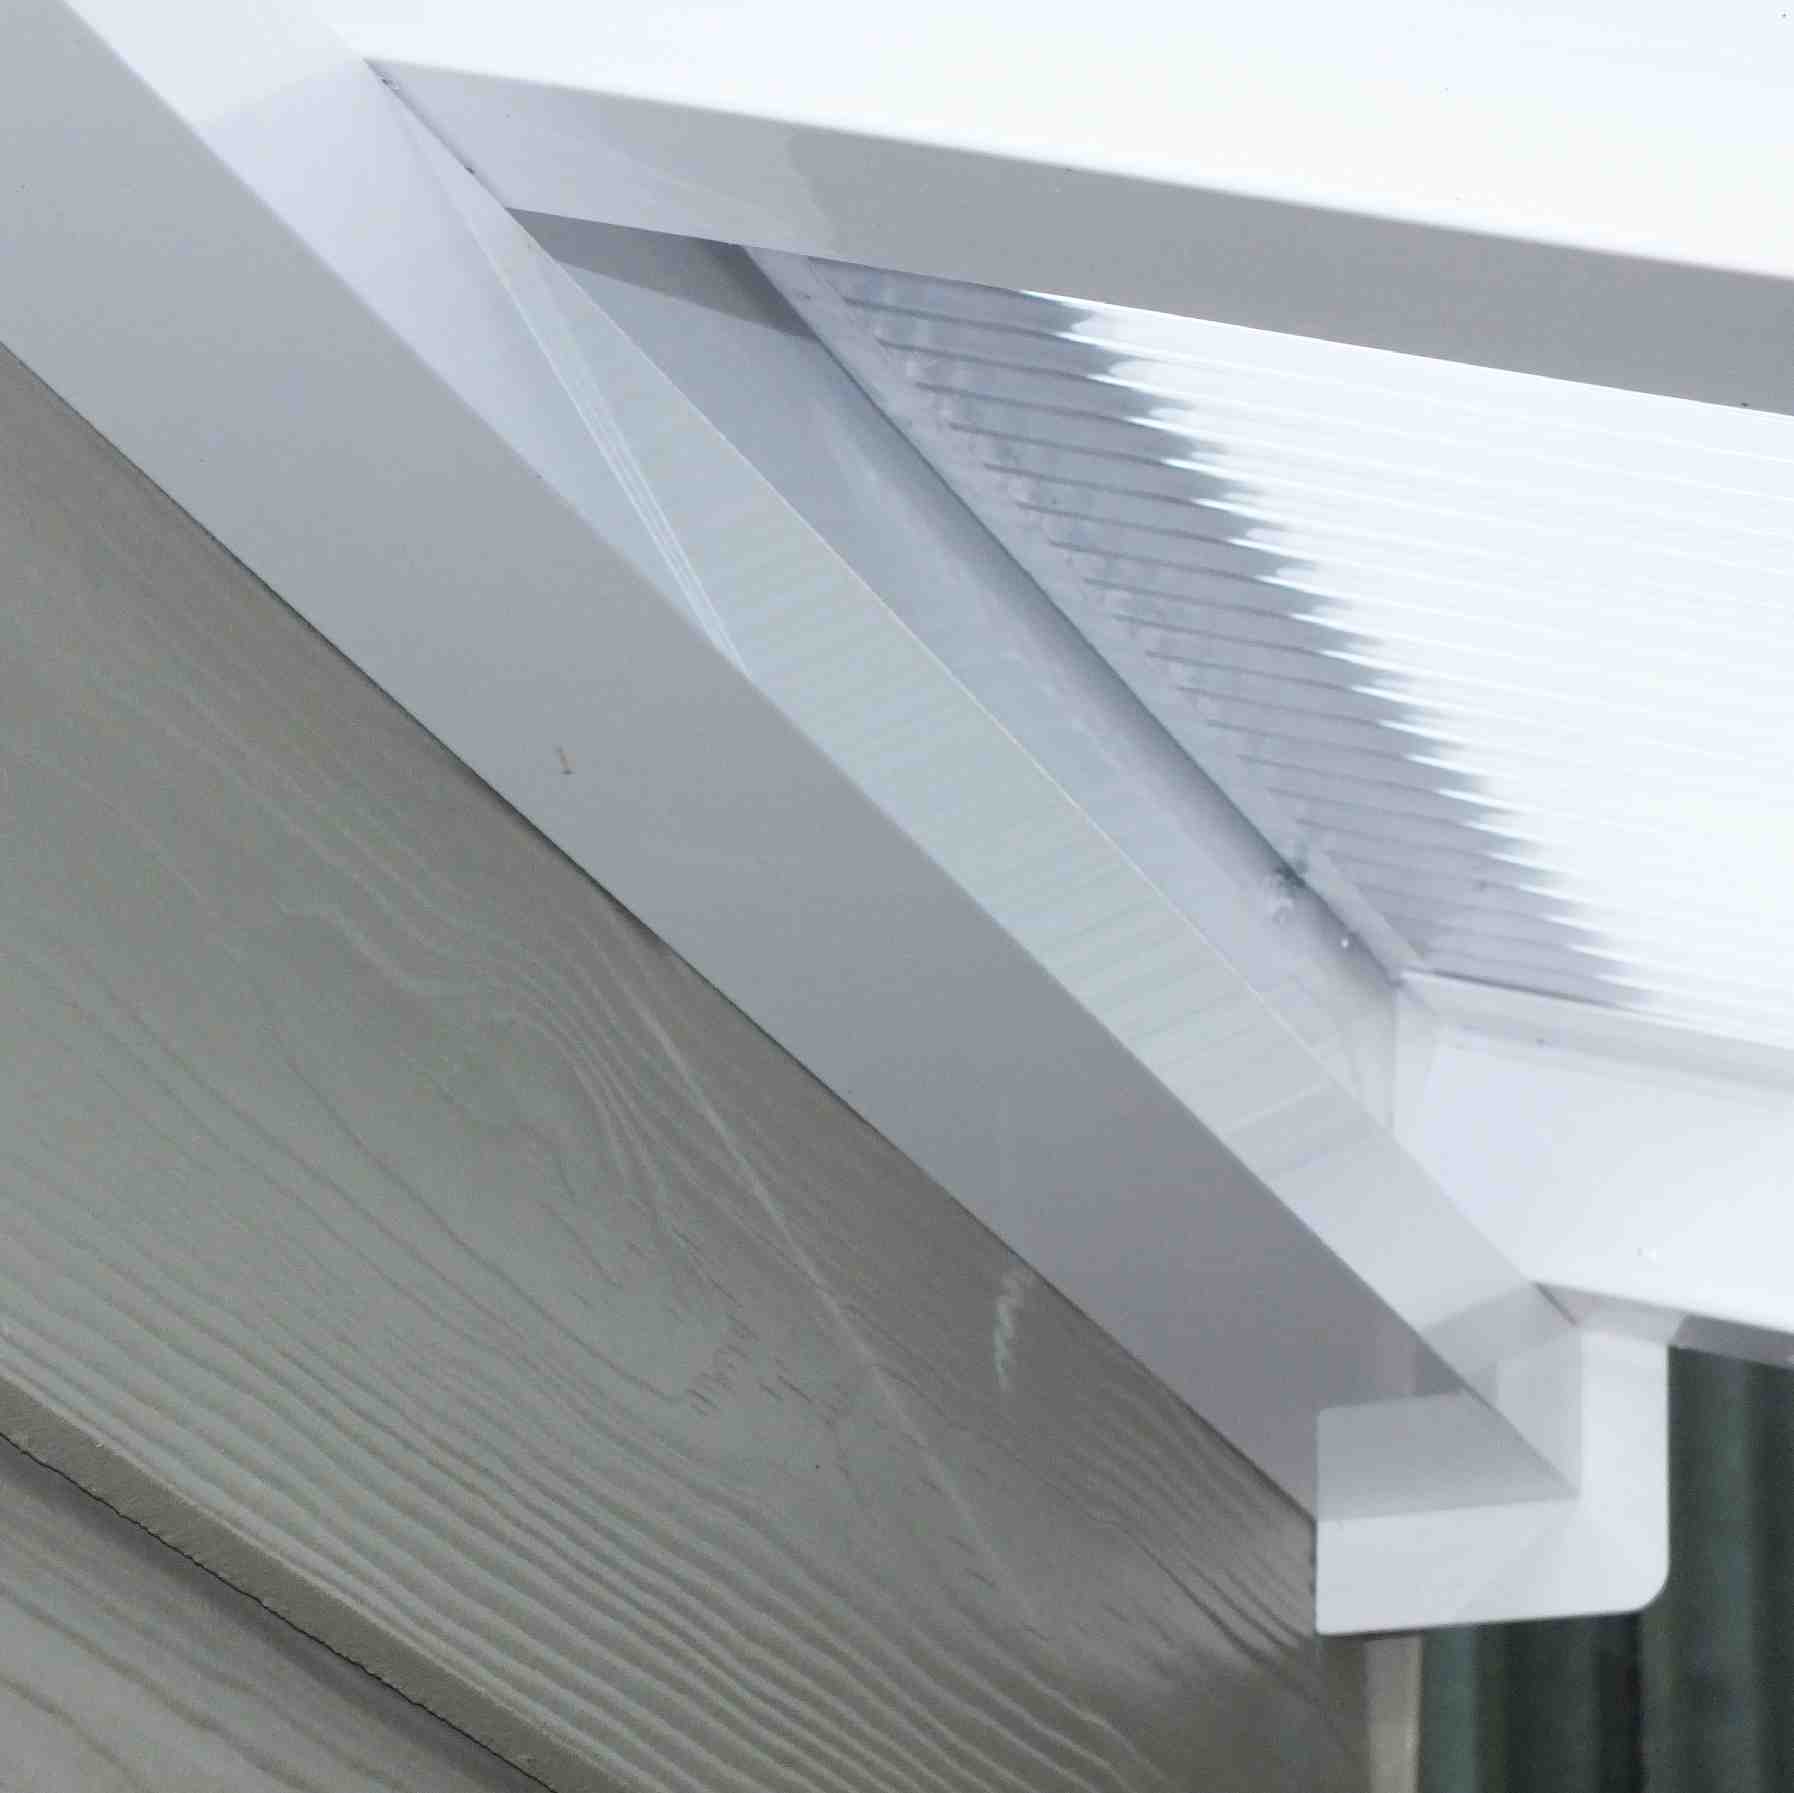 Great deals on Omega Verandah White with 16mm Polycarbonate Glazing - 6.0m (W) x 3.0m (P), (3) Supporting Posts